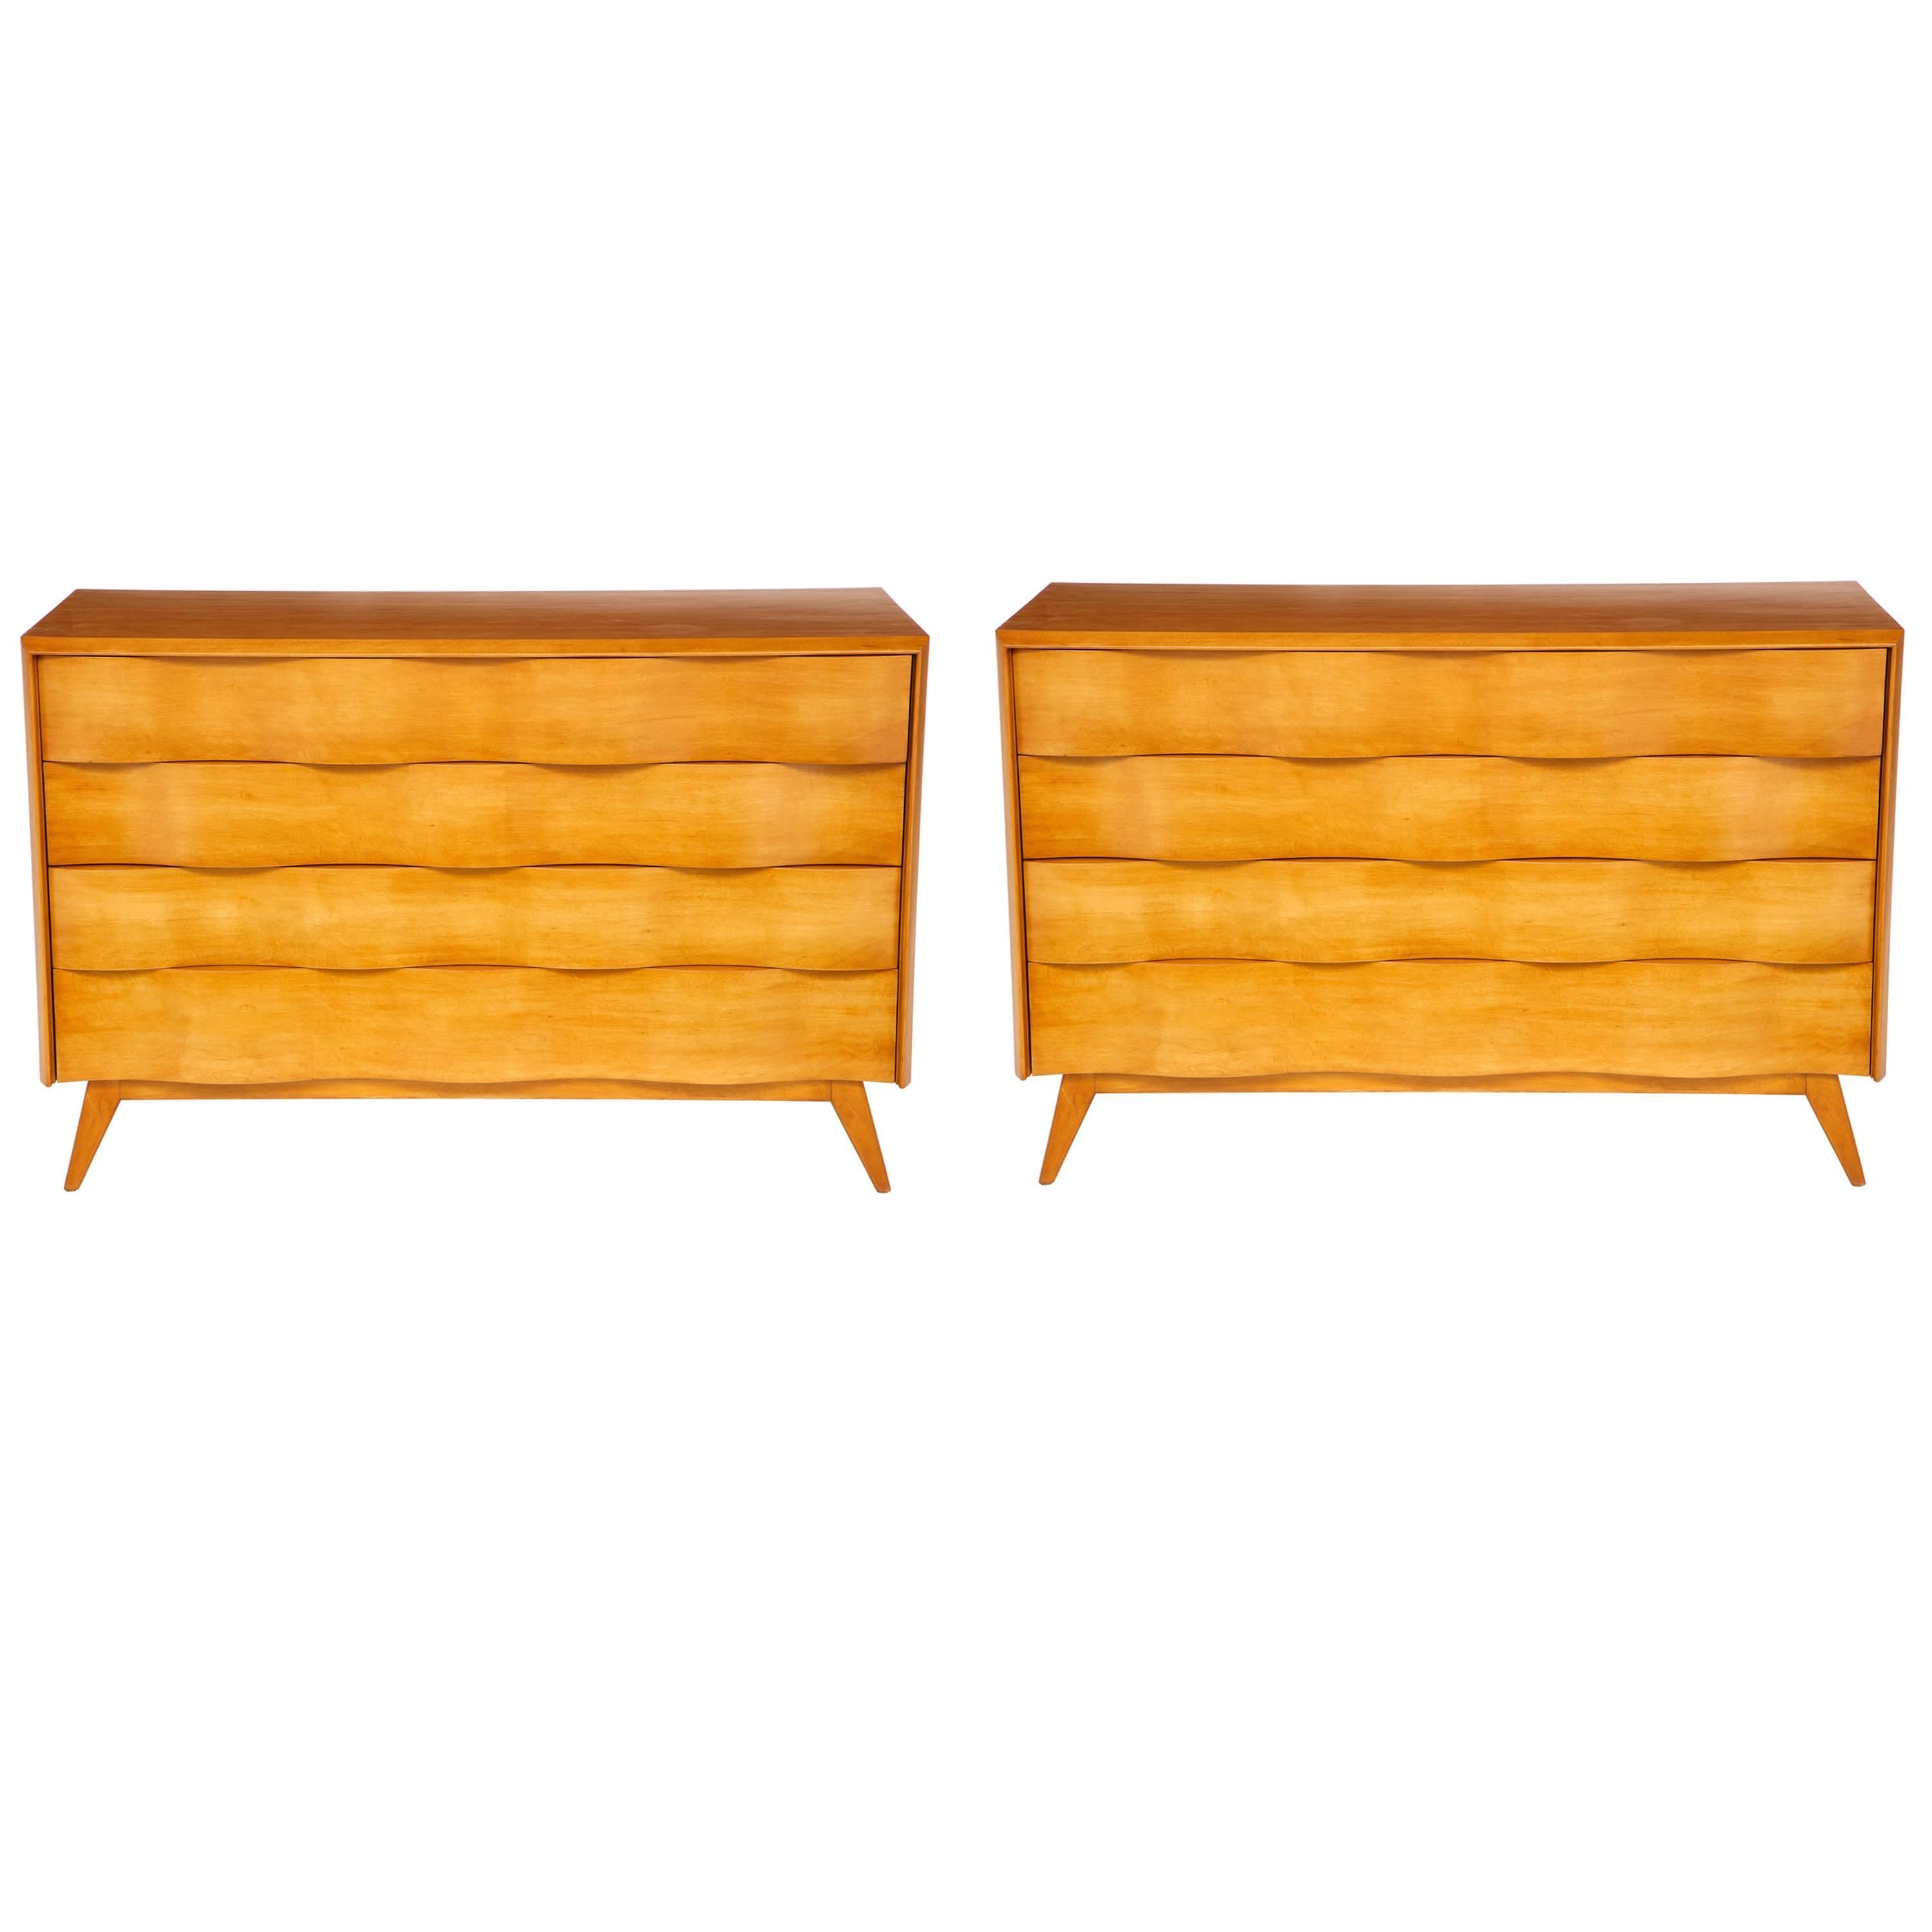 Pair of Edmond Spence Wave Front Chests, Sweden, 1950s